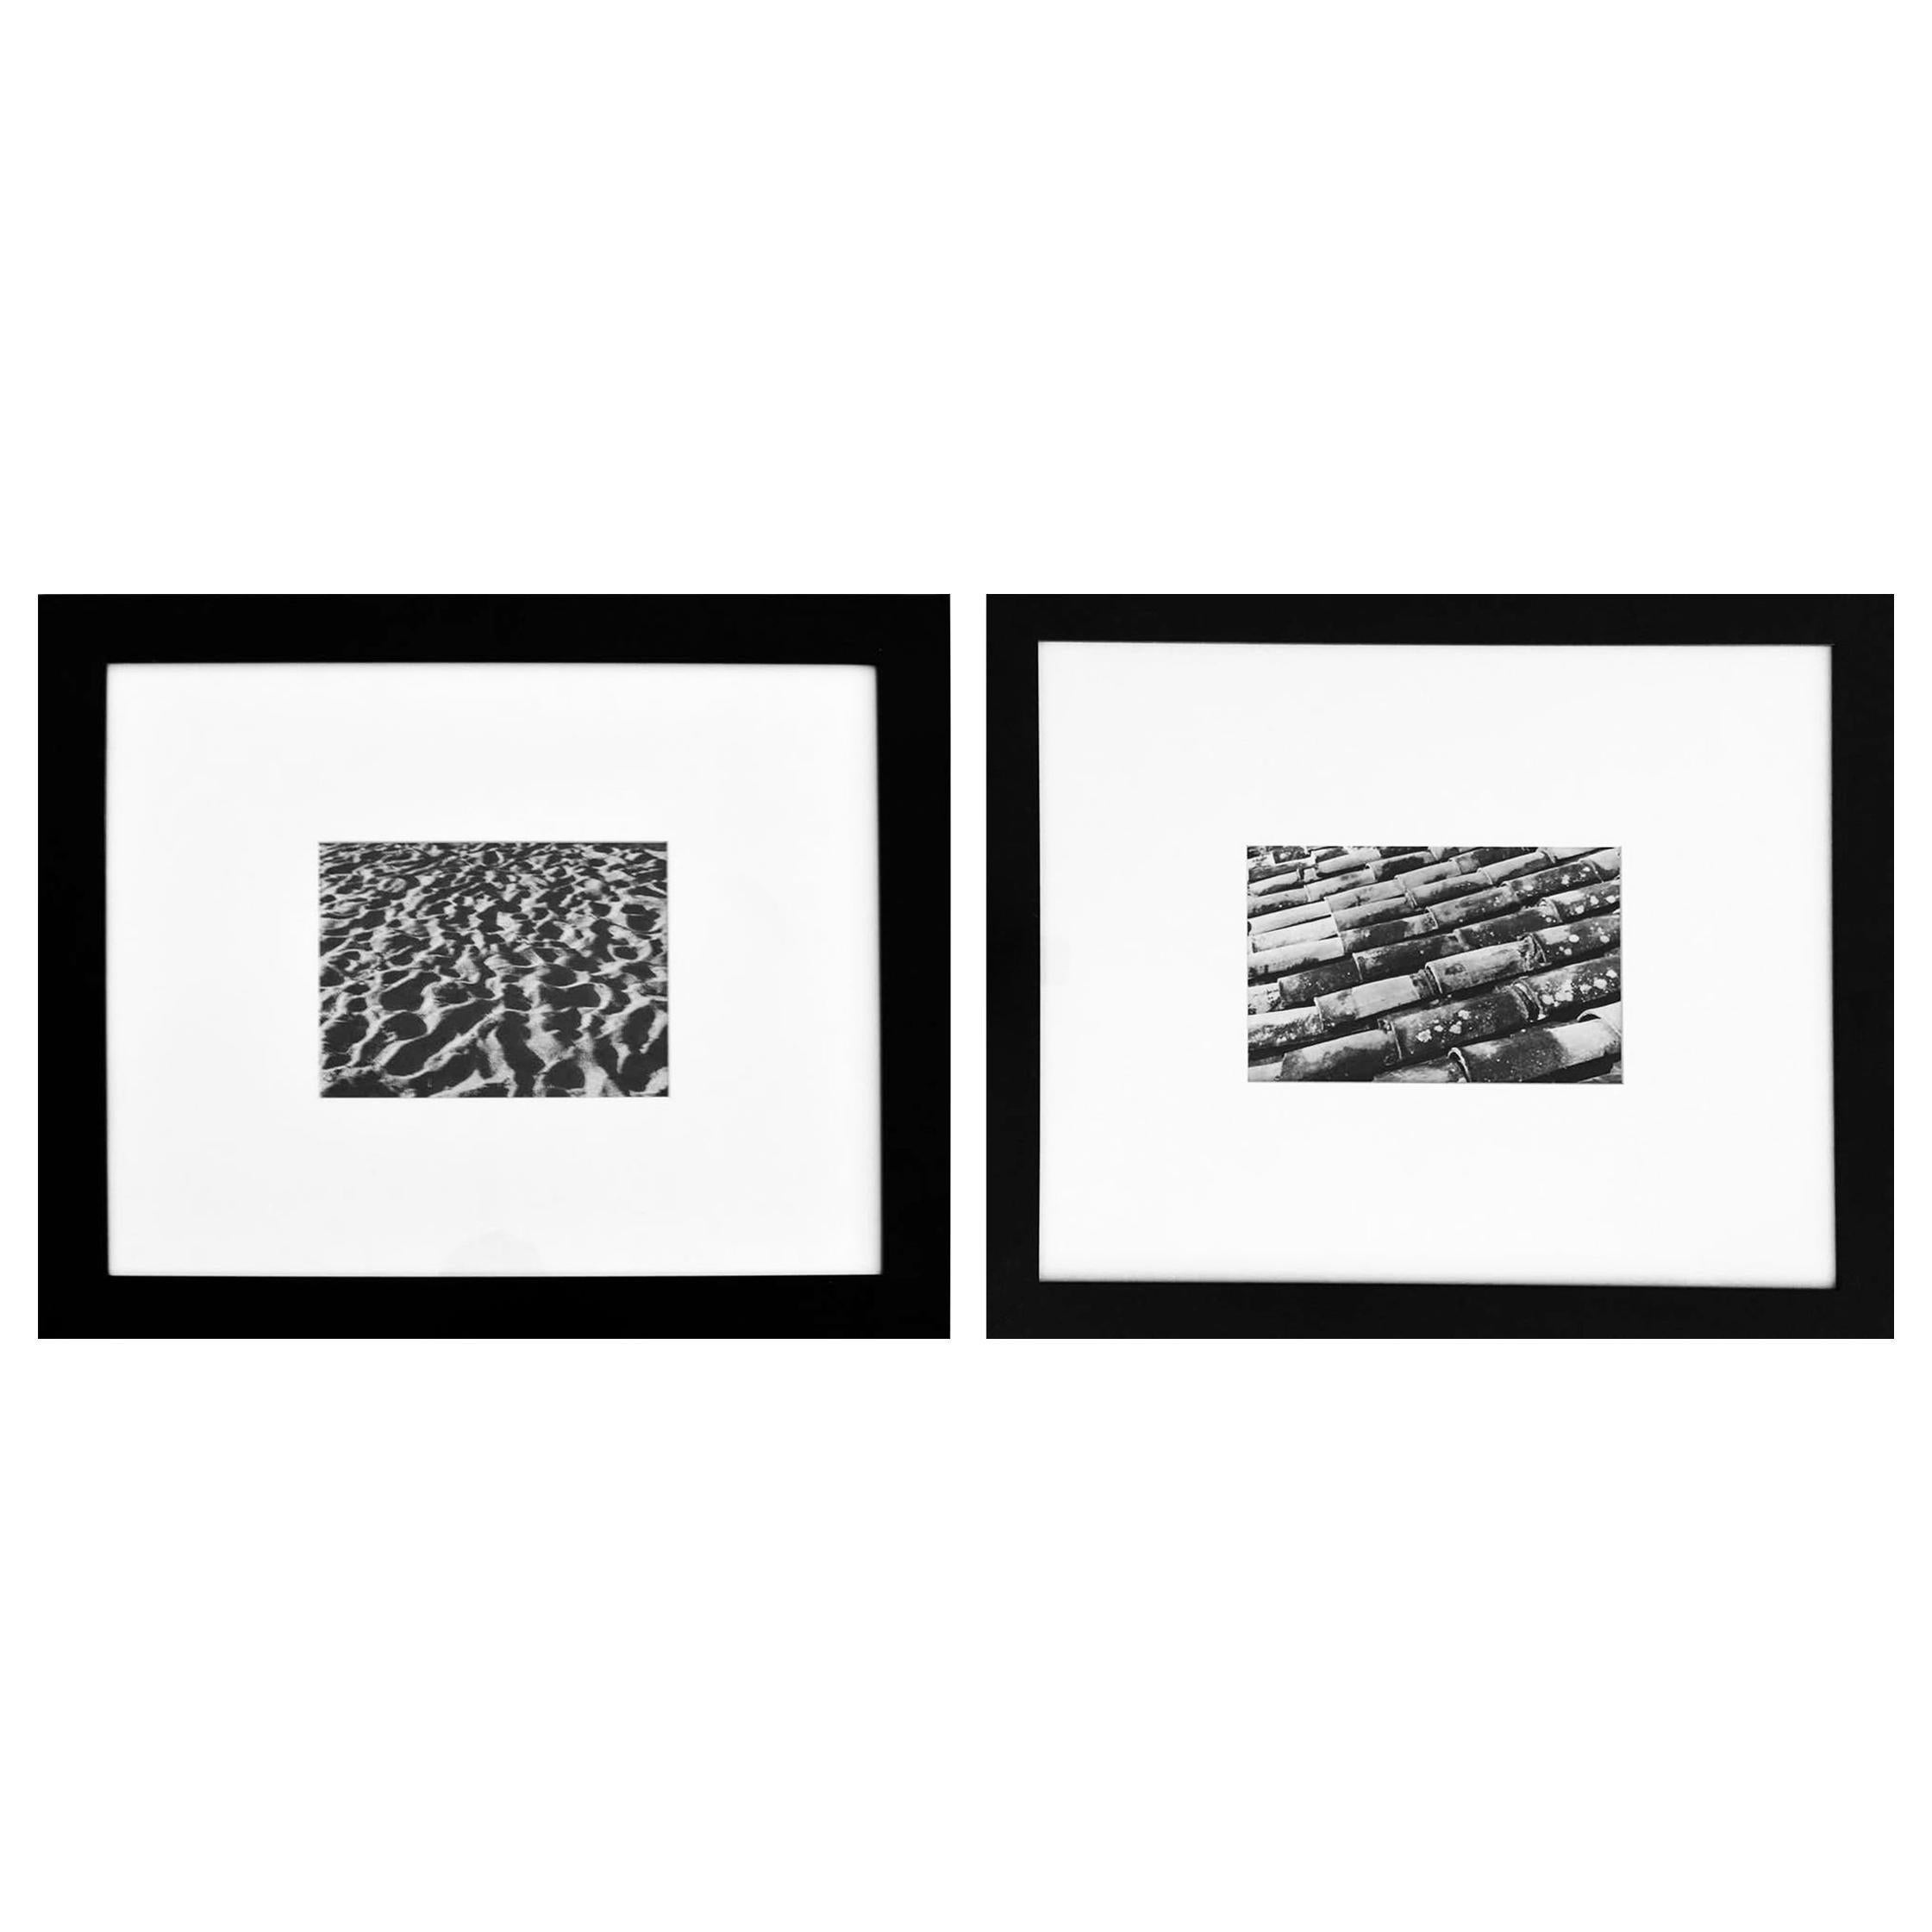 Leo Matiz Black and White Photograph - Diptych Arena de la Playa and Techos, Mexico, Vintage Photography. Framed